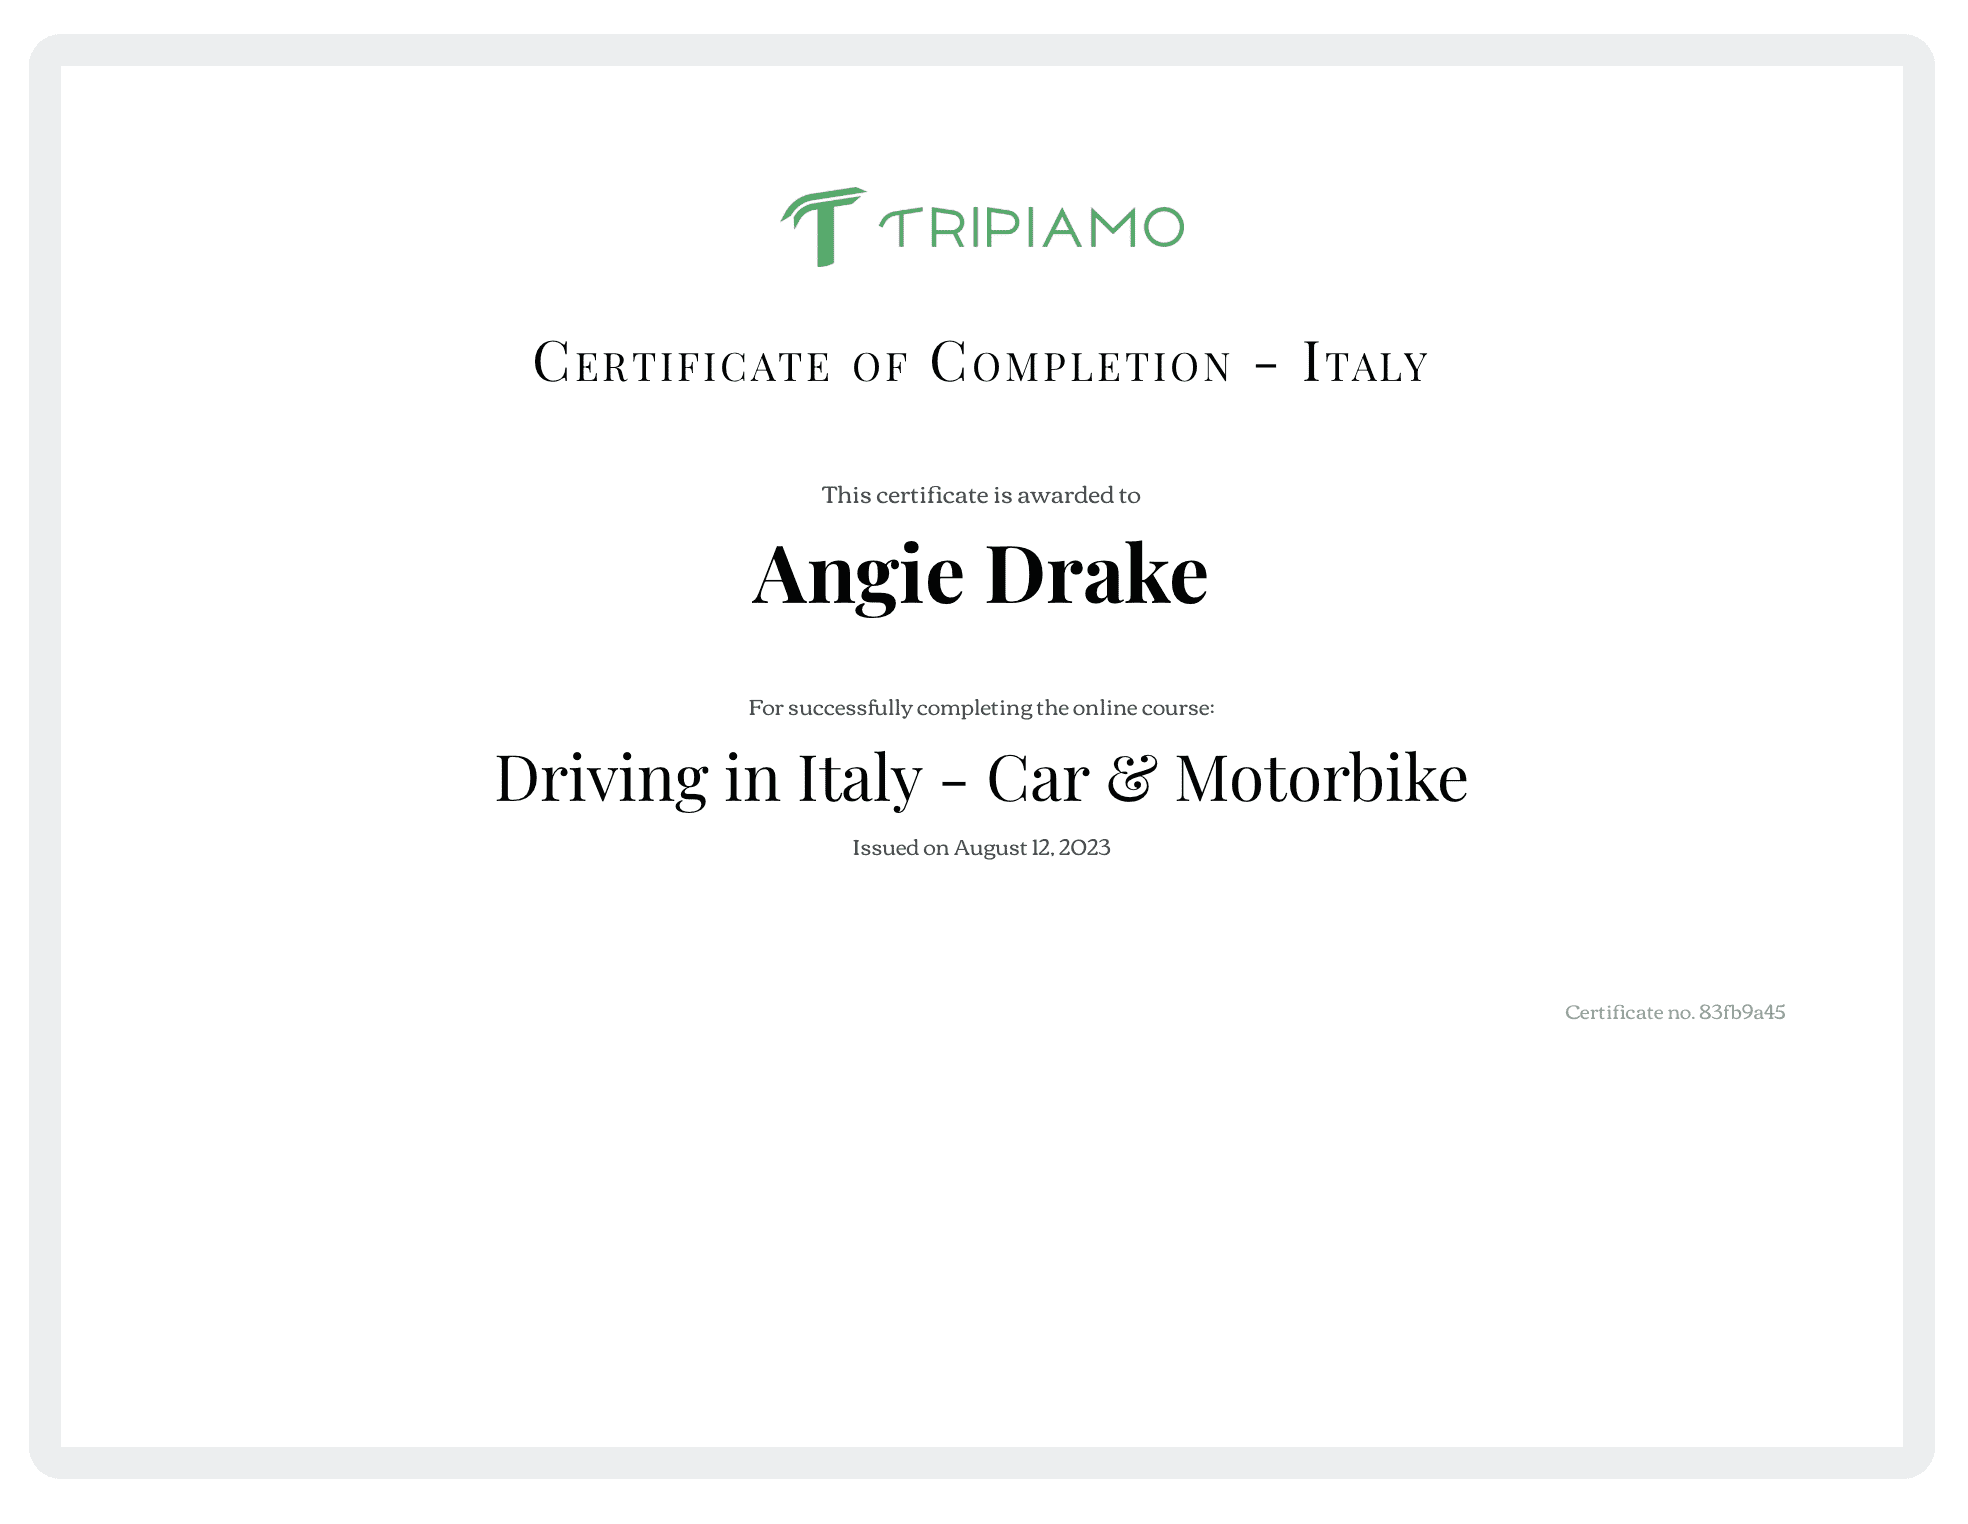 Certificate for Tripiamo Driving in Italy Online Course